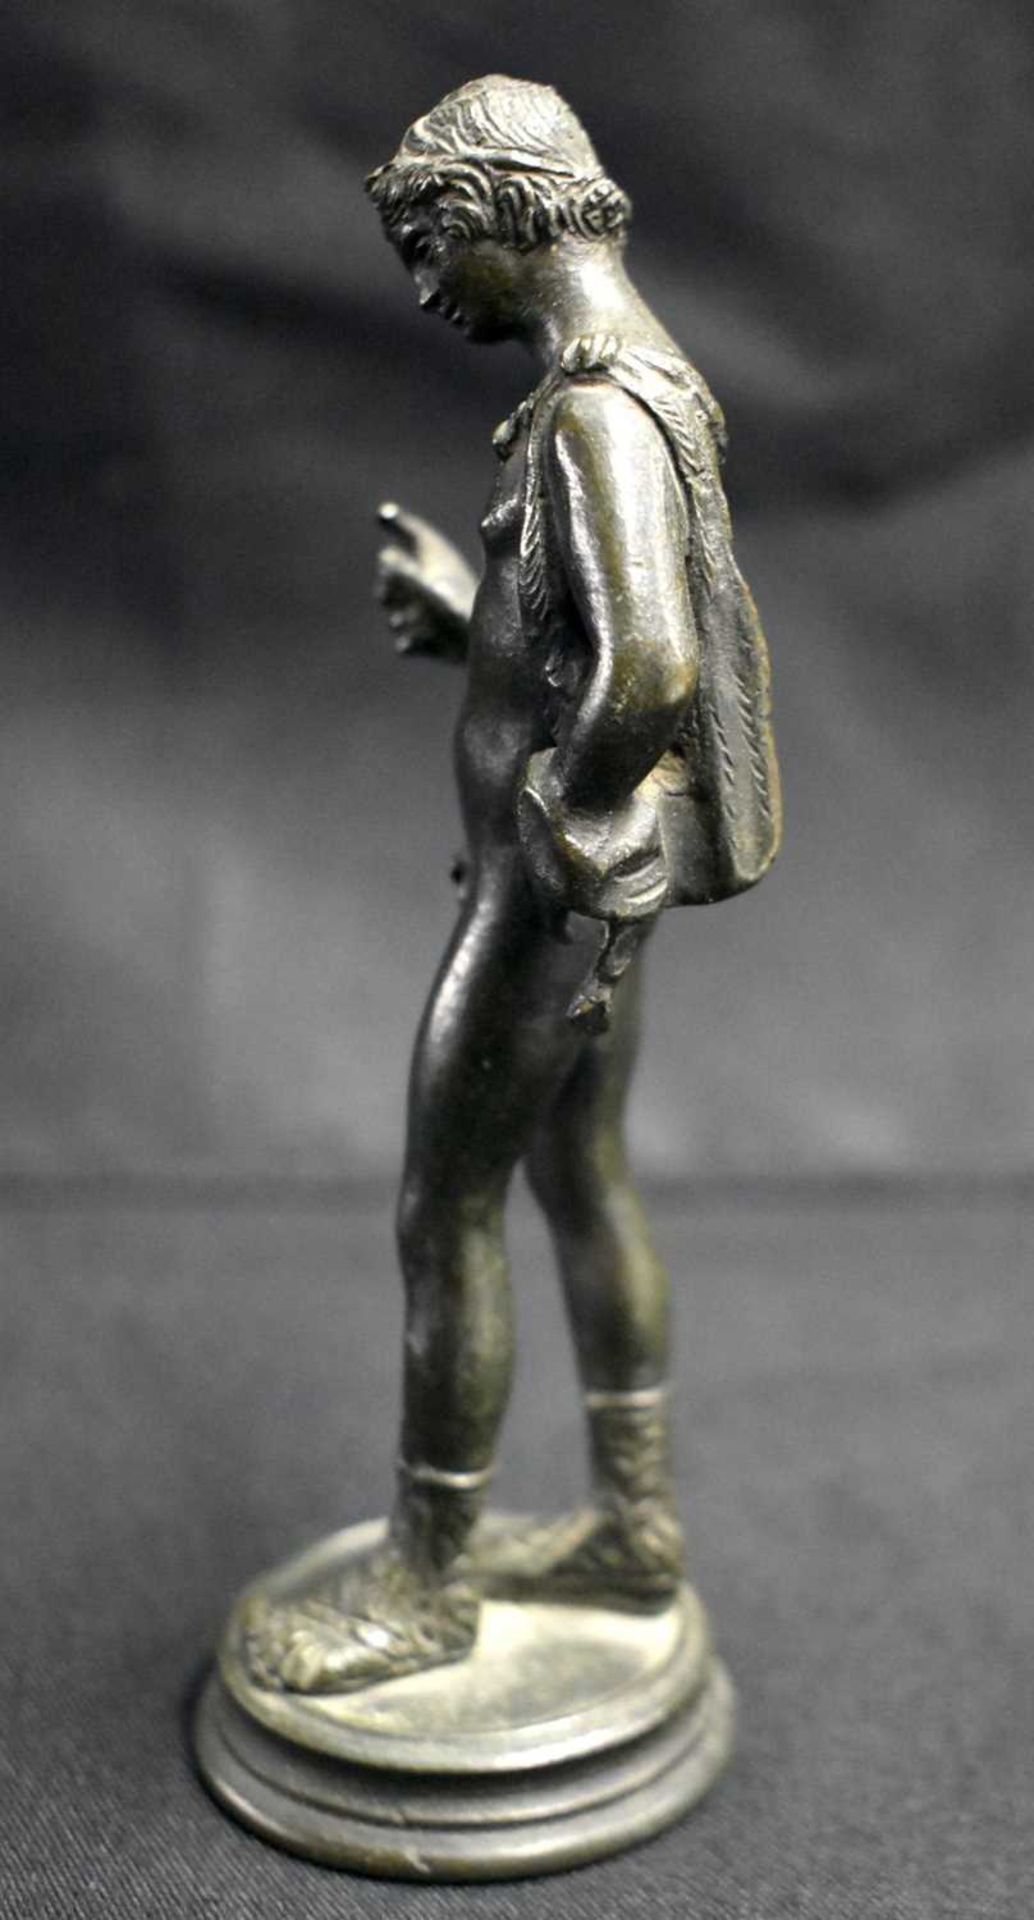 A 19TH CENTURY ITALIAN GRAND TOUR BRONZE FIGURE OF NARCISSUS After the Antiquity. 13 cm high. - Image 5 of 6